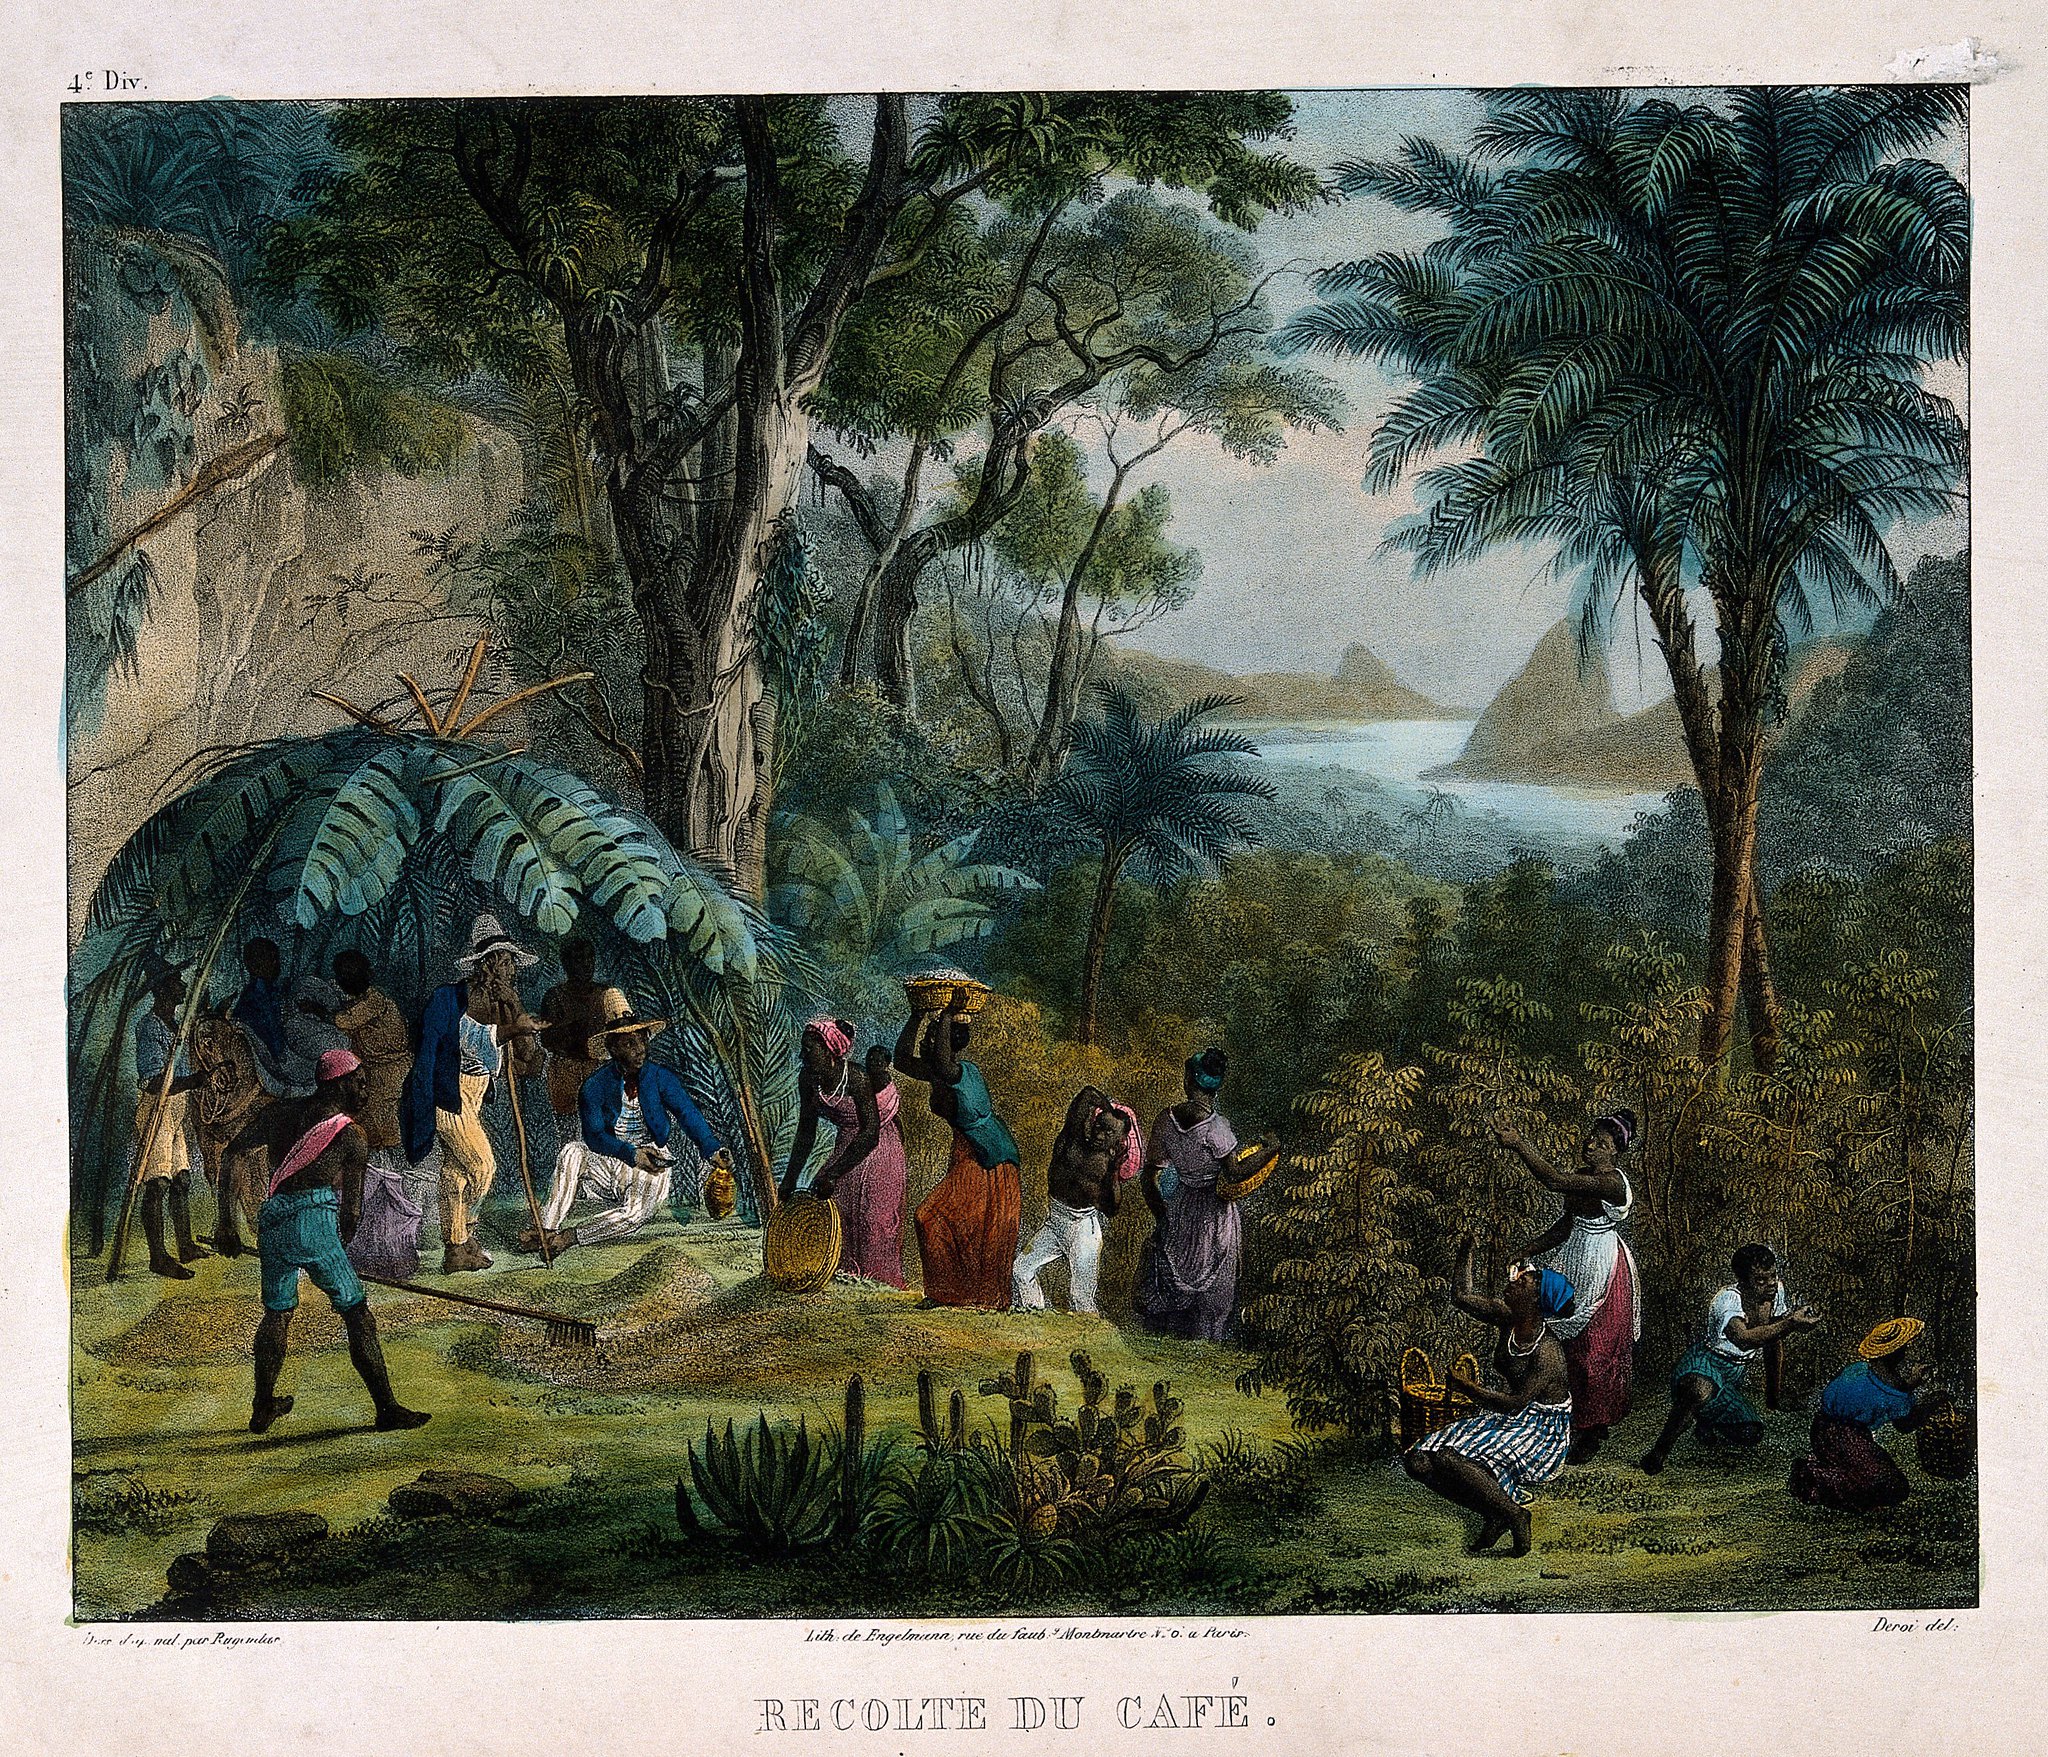 Indian workers harvesting the crop on a coffee plantation. Coloured lithograph by Deroi, c. 1850, after J. M. Rugendas.